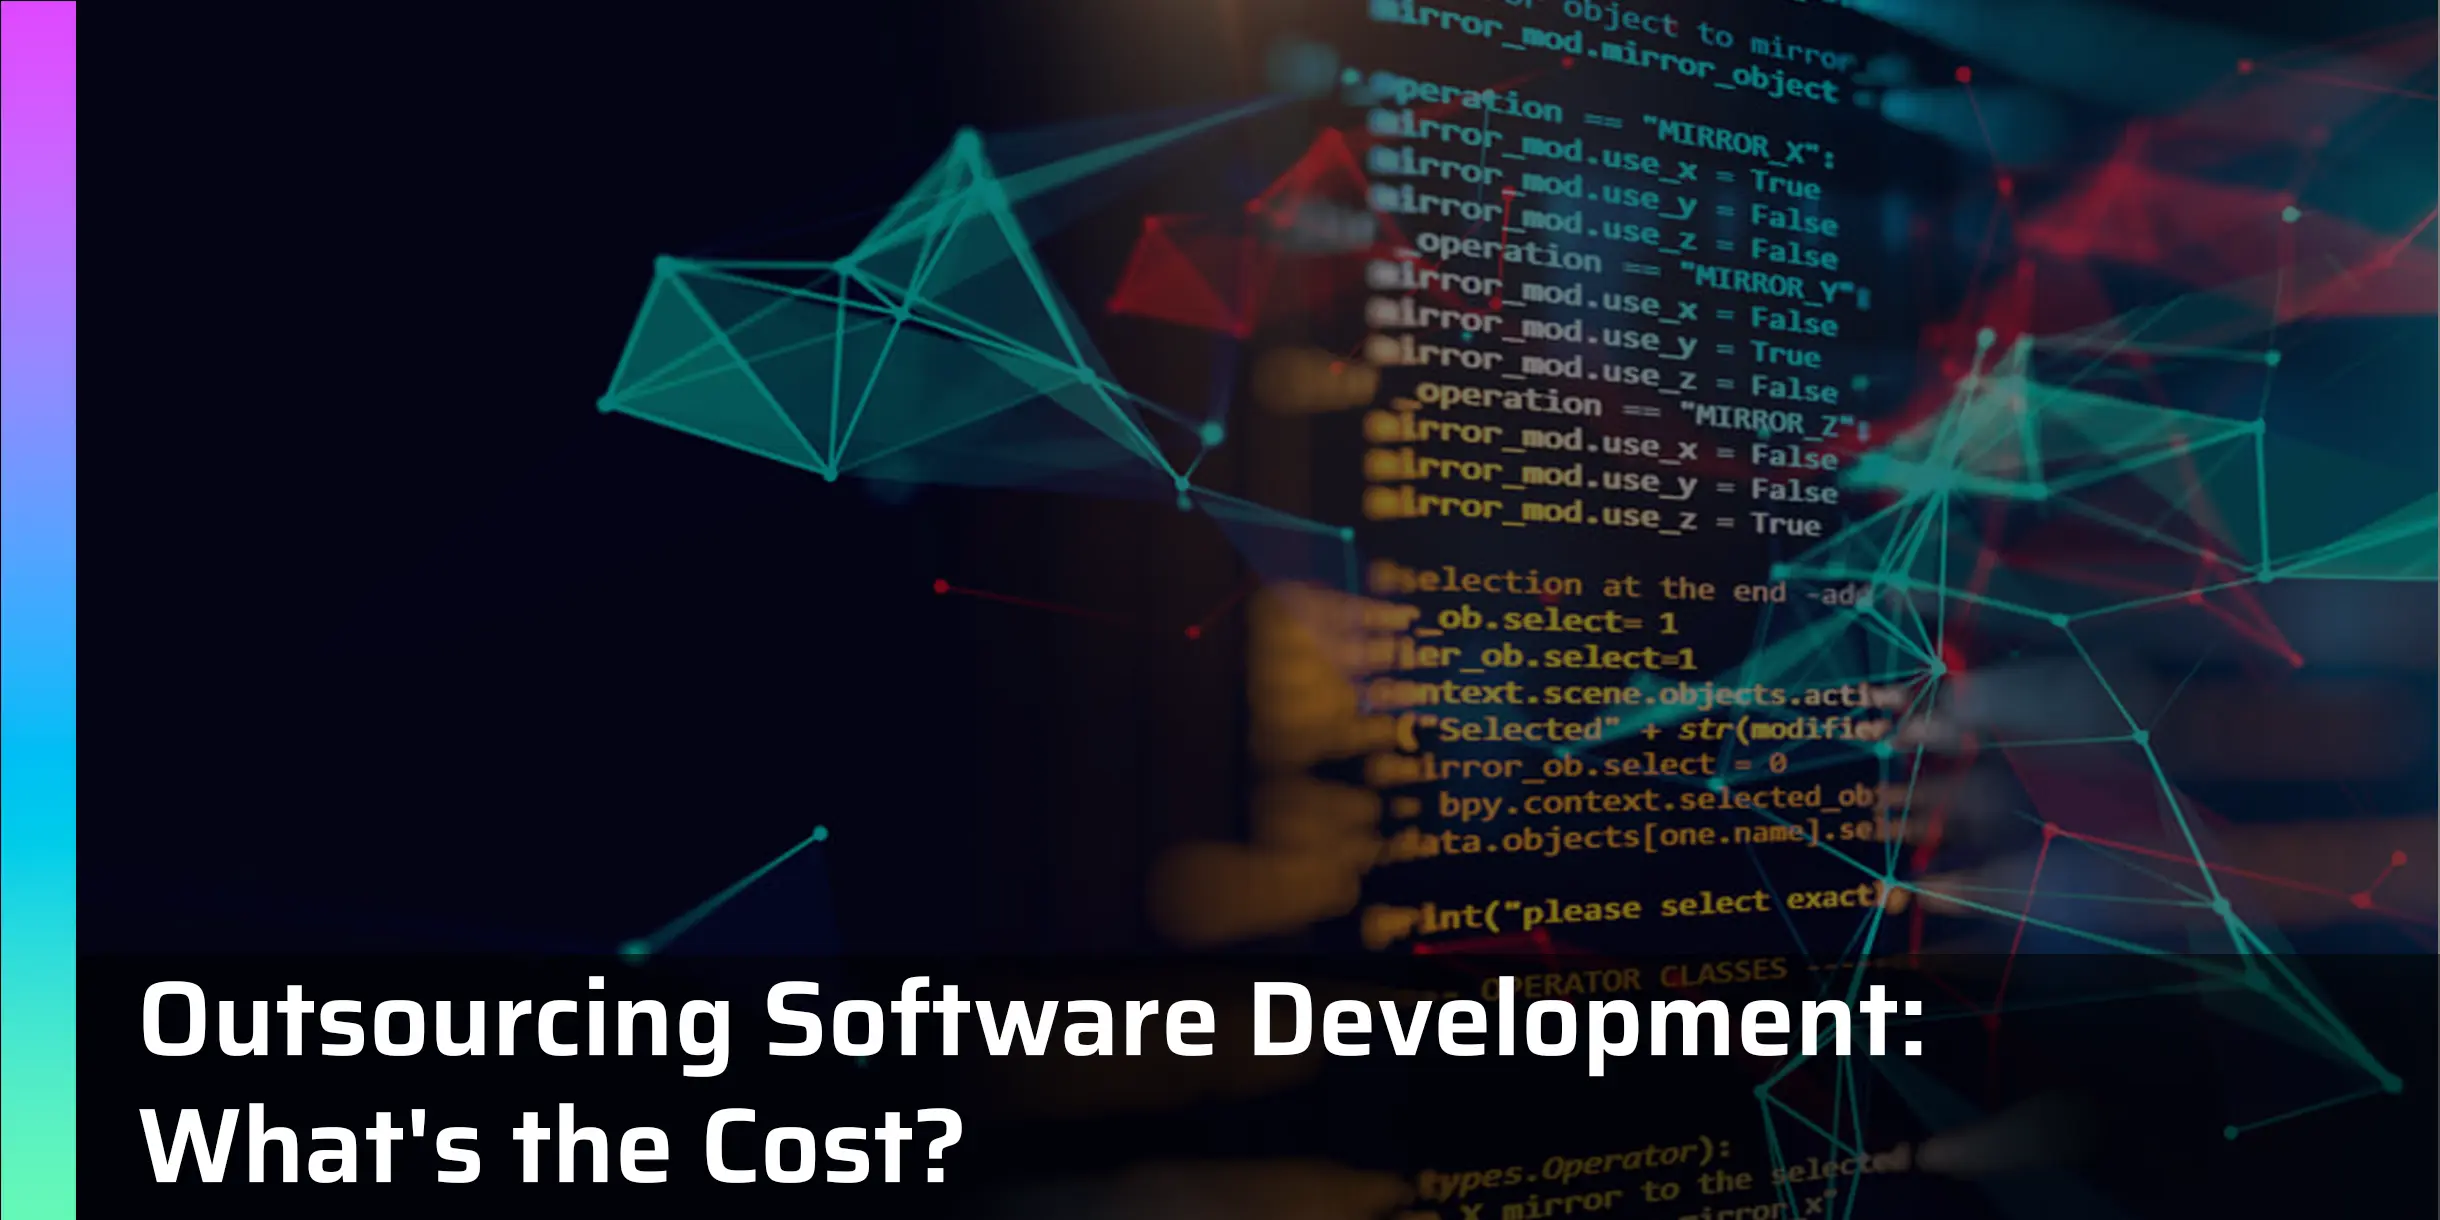 How Much Does it Cost to Outsourcing Software Development